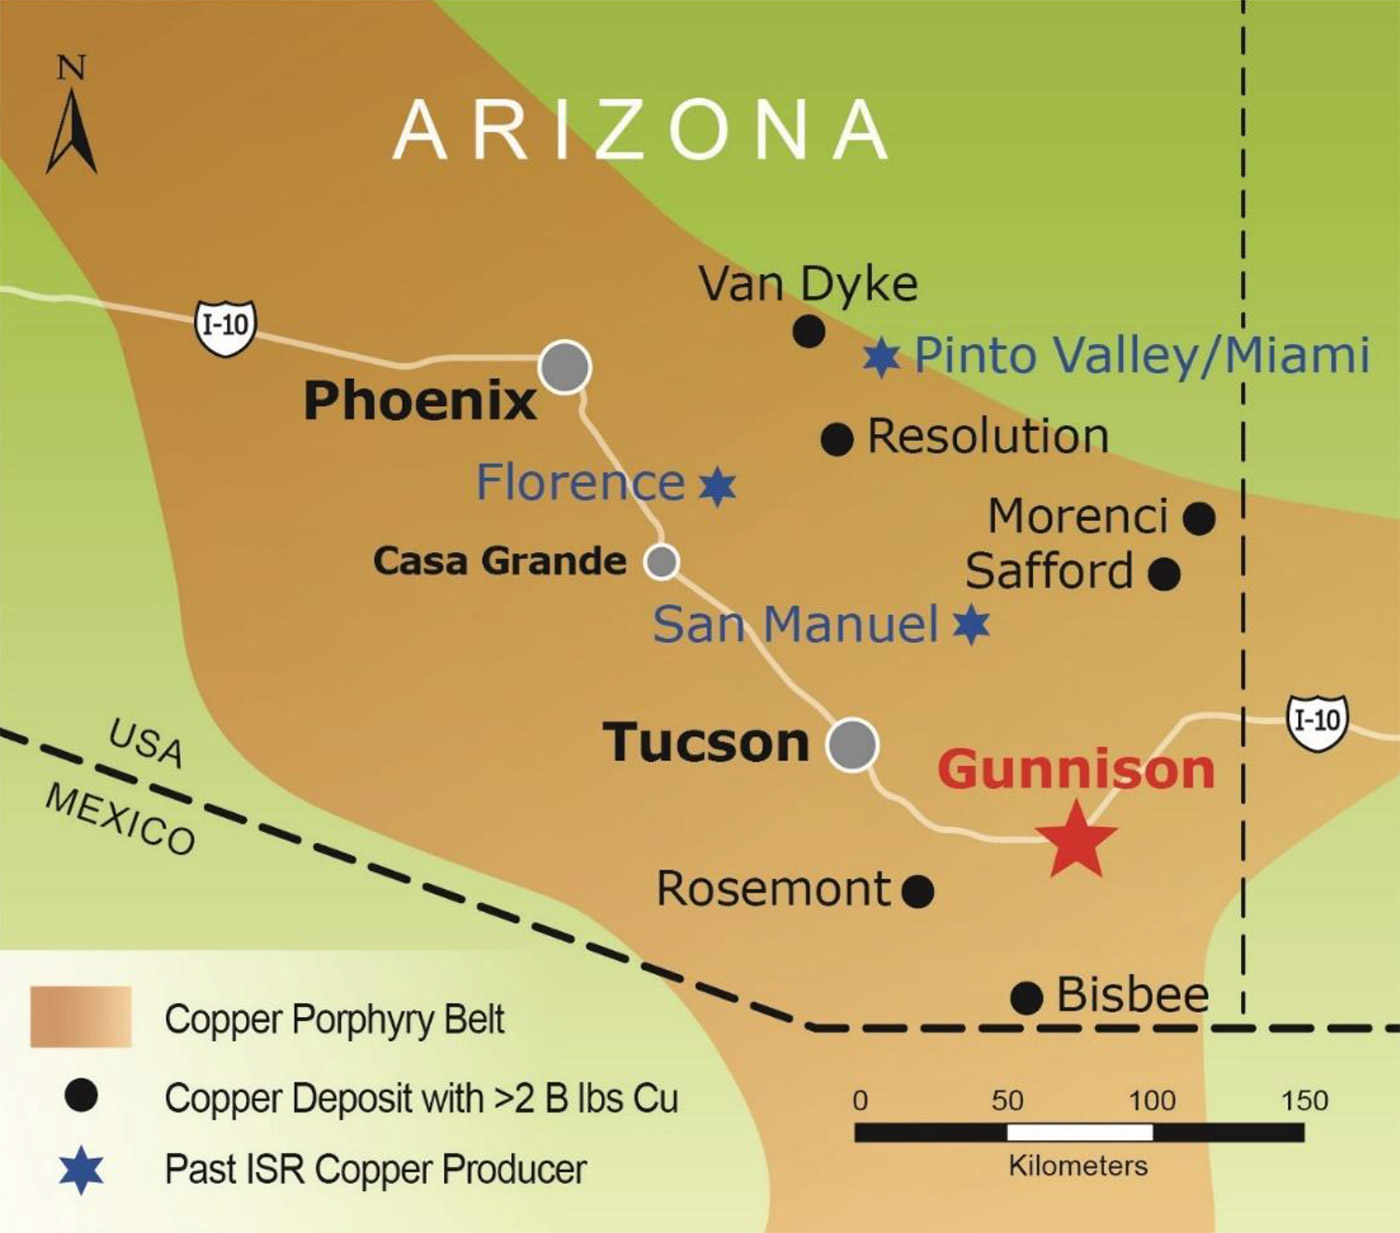 Arizona has a positive track record for ISR mining.